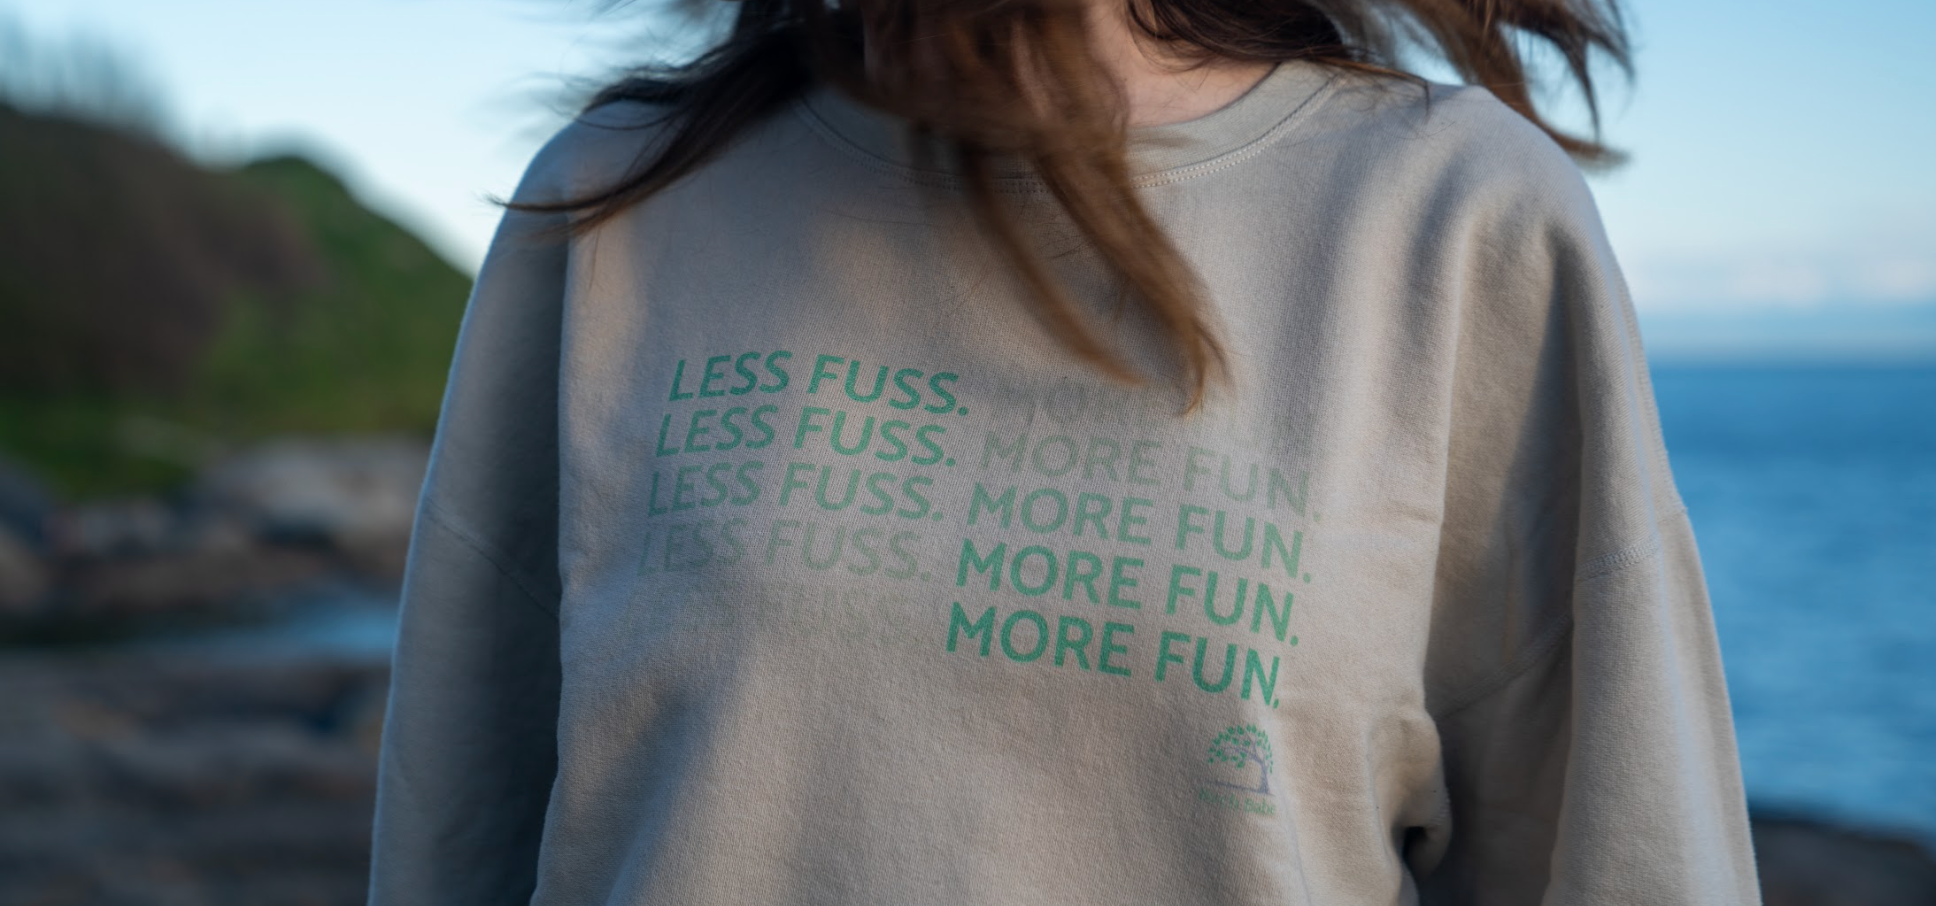 #LessFussMoreFun stands for Confident, Uncomplicated, Low Waste Beauty